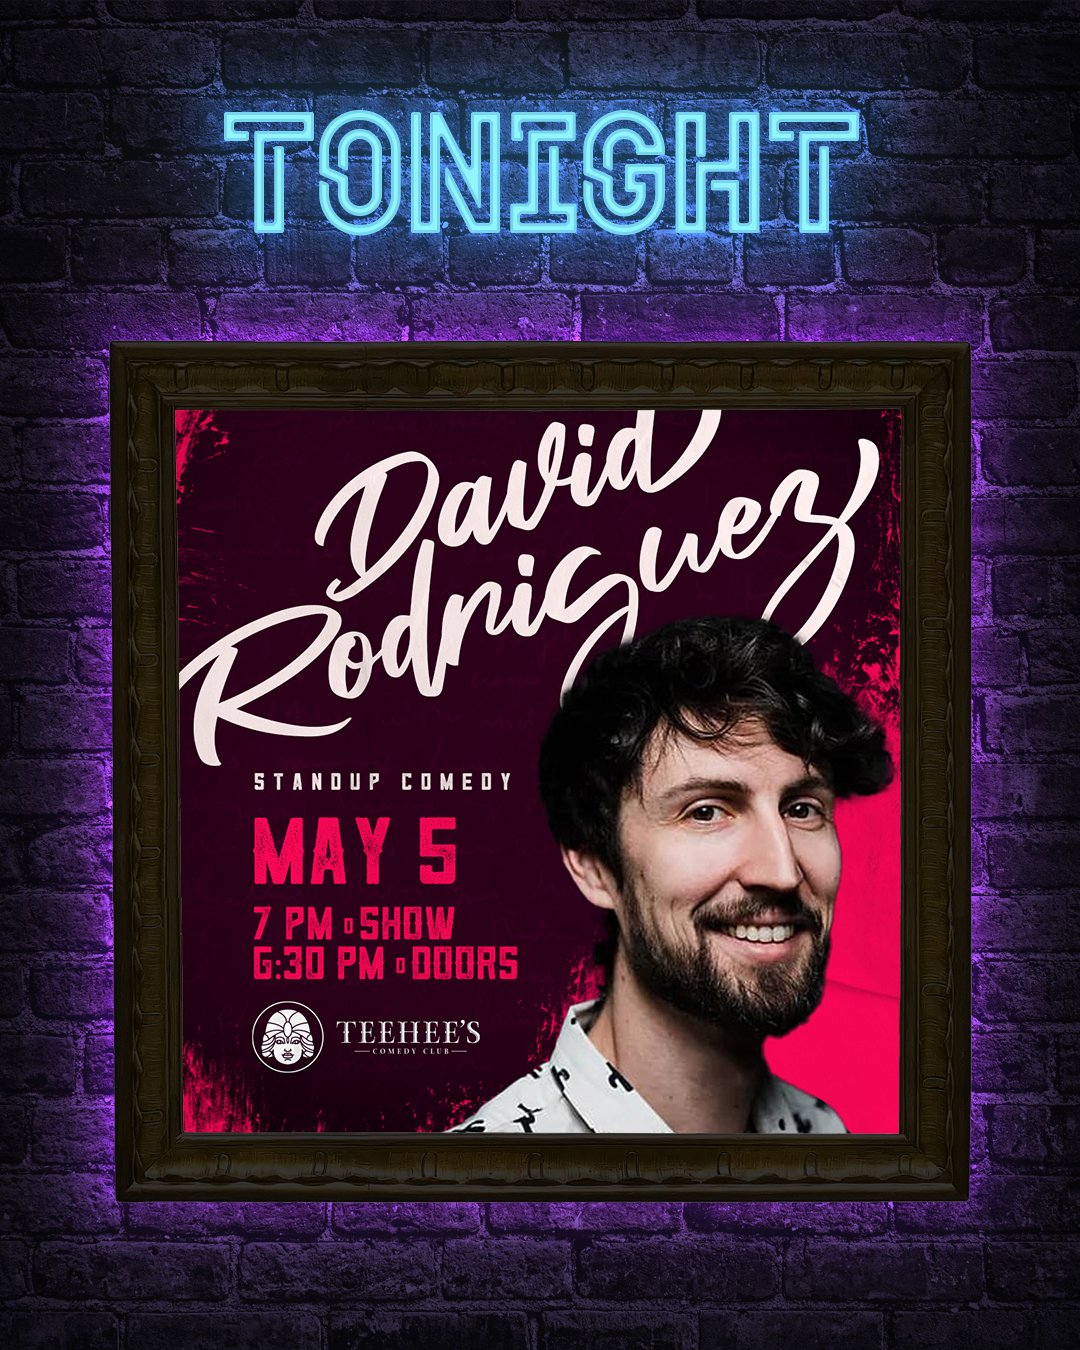 🔥🎤🔥 David Rodriguez hits the club on a Sunday night for ONE SHOW ONLY!
Get 🎟🎟🎟 at teeheescomedy.com/shows